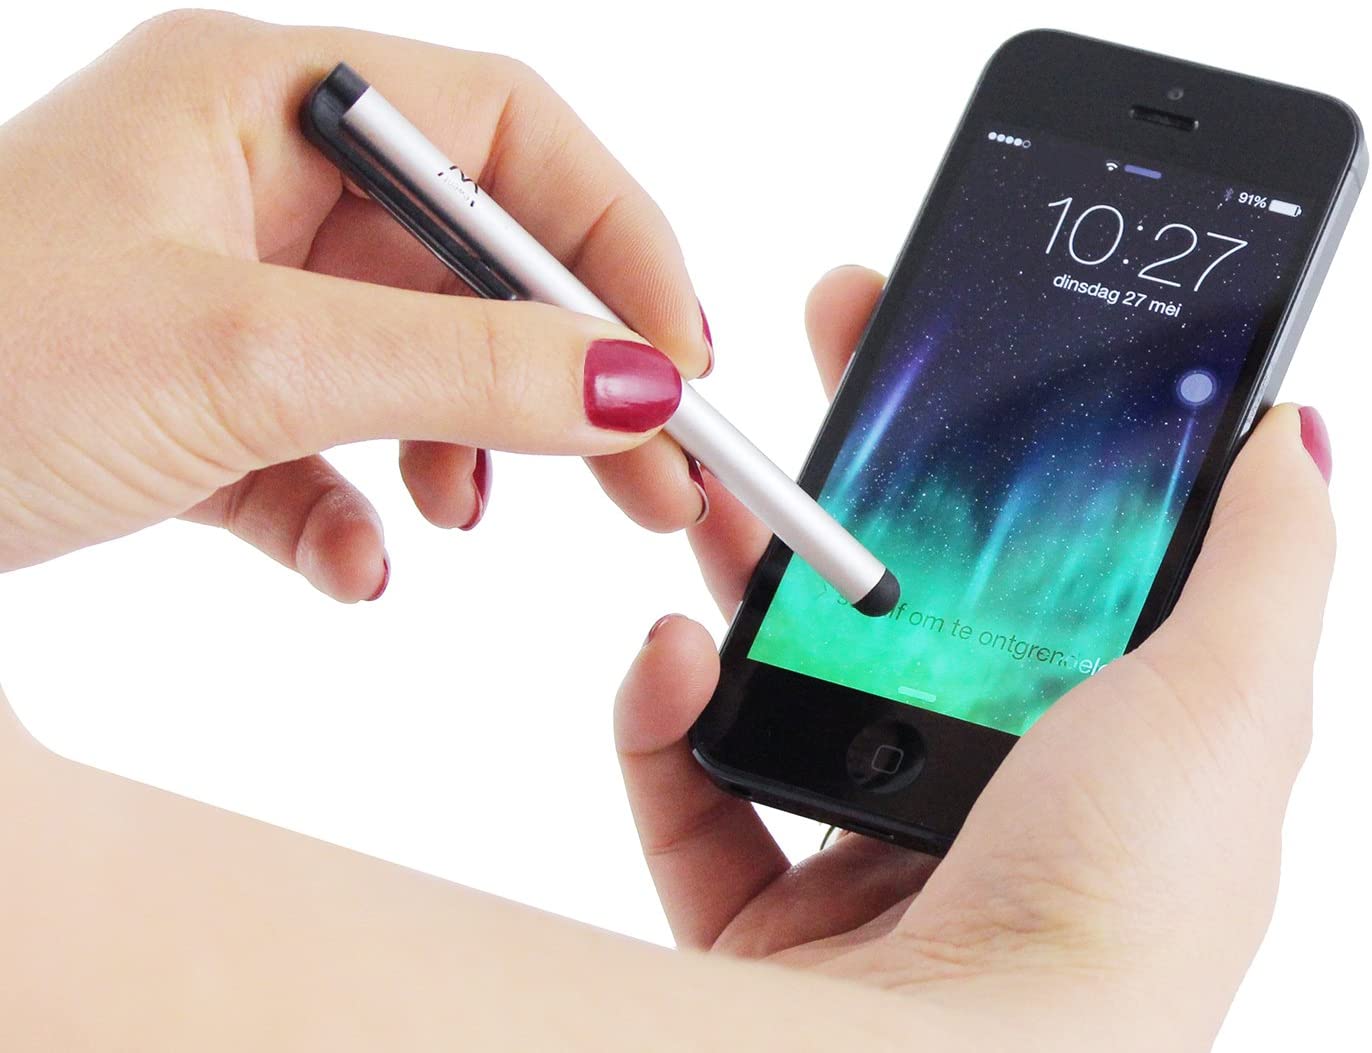 Ewent EW1424 Smartpen Stylus for Smartphone and Tablet